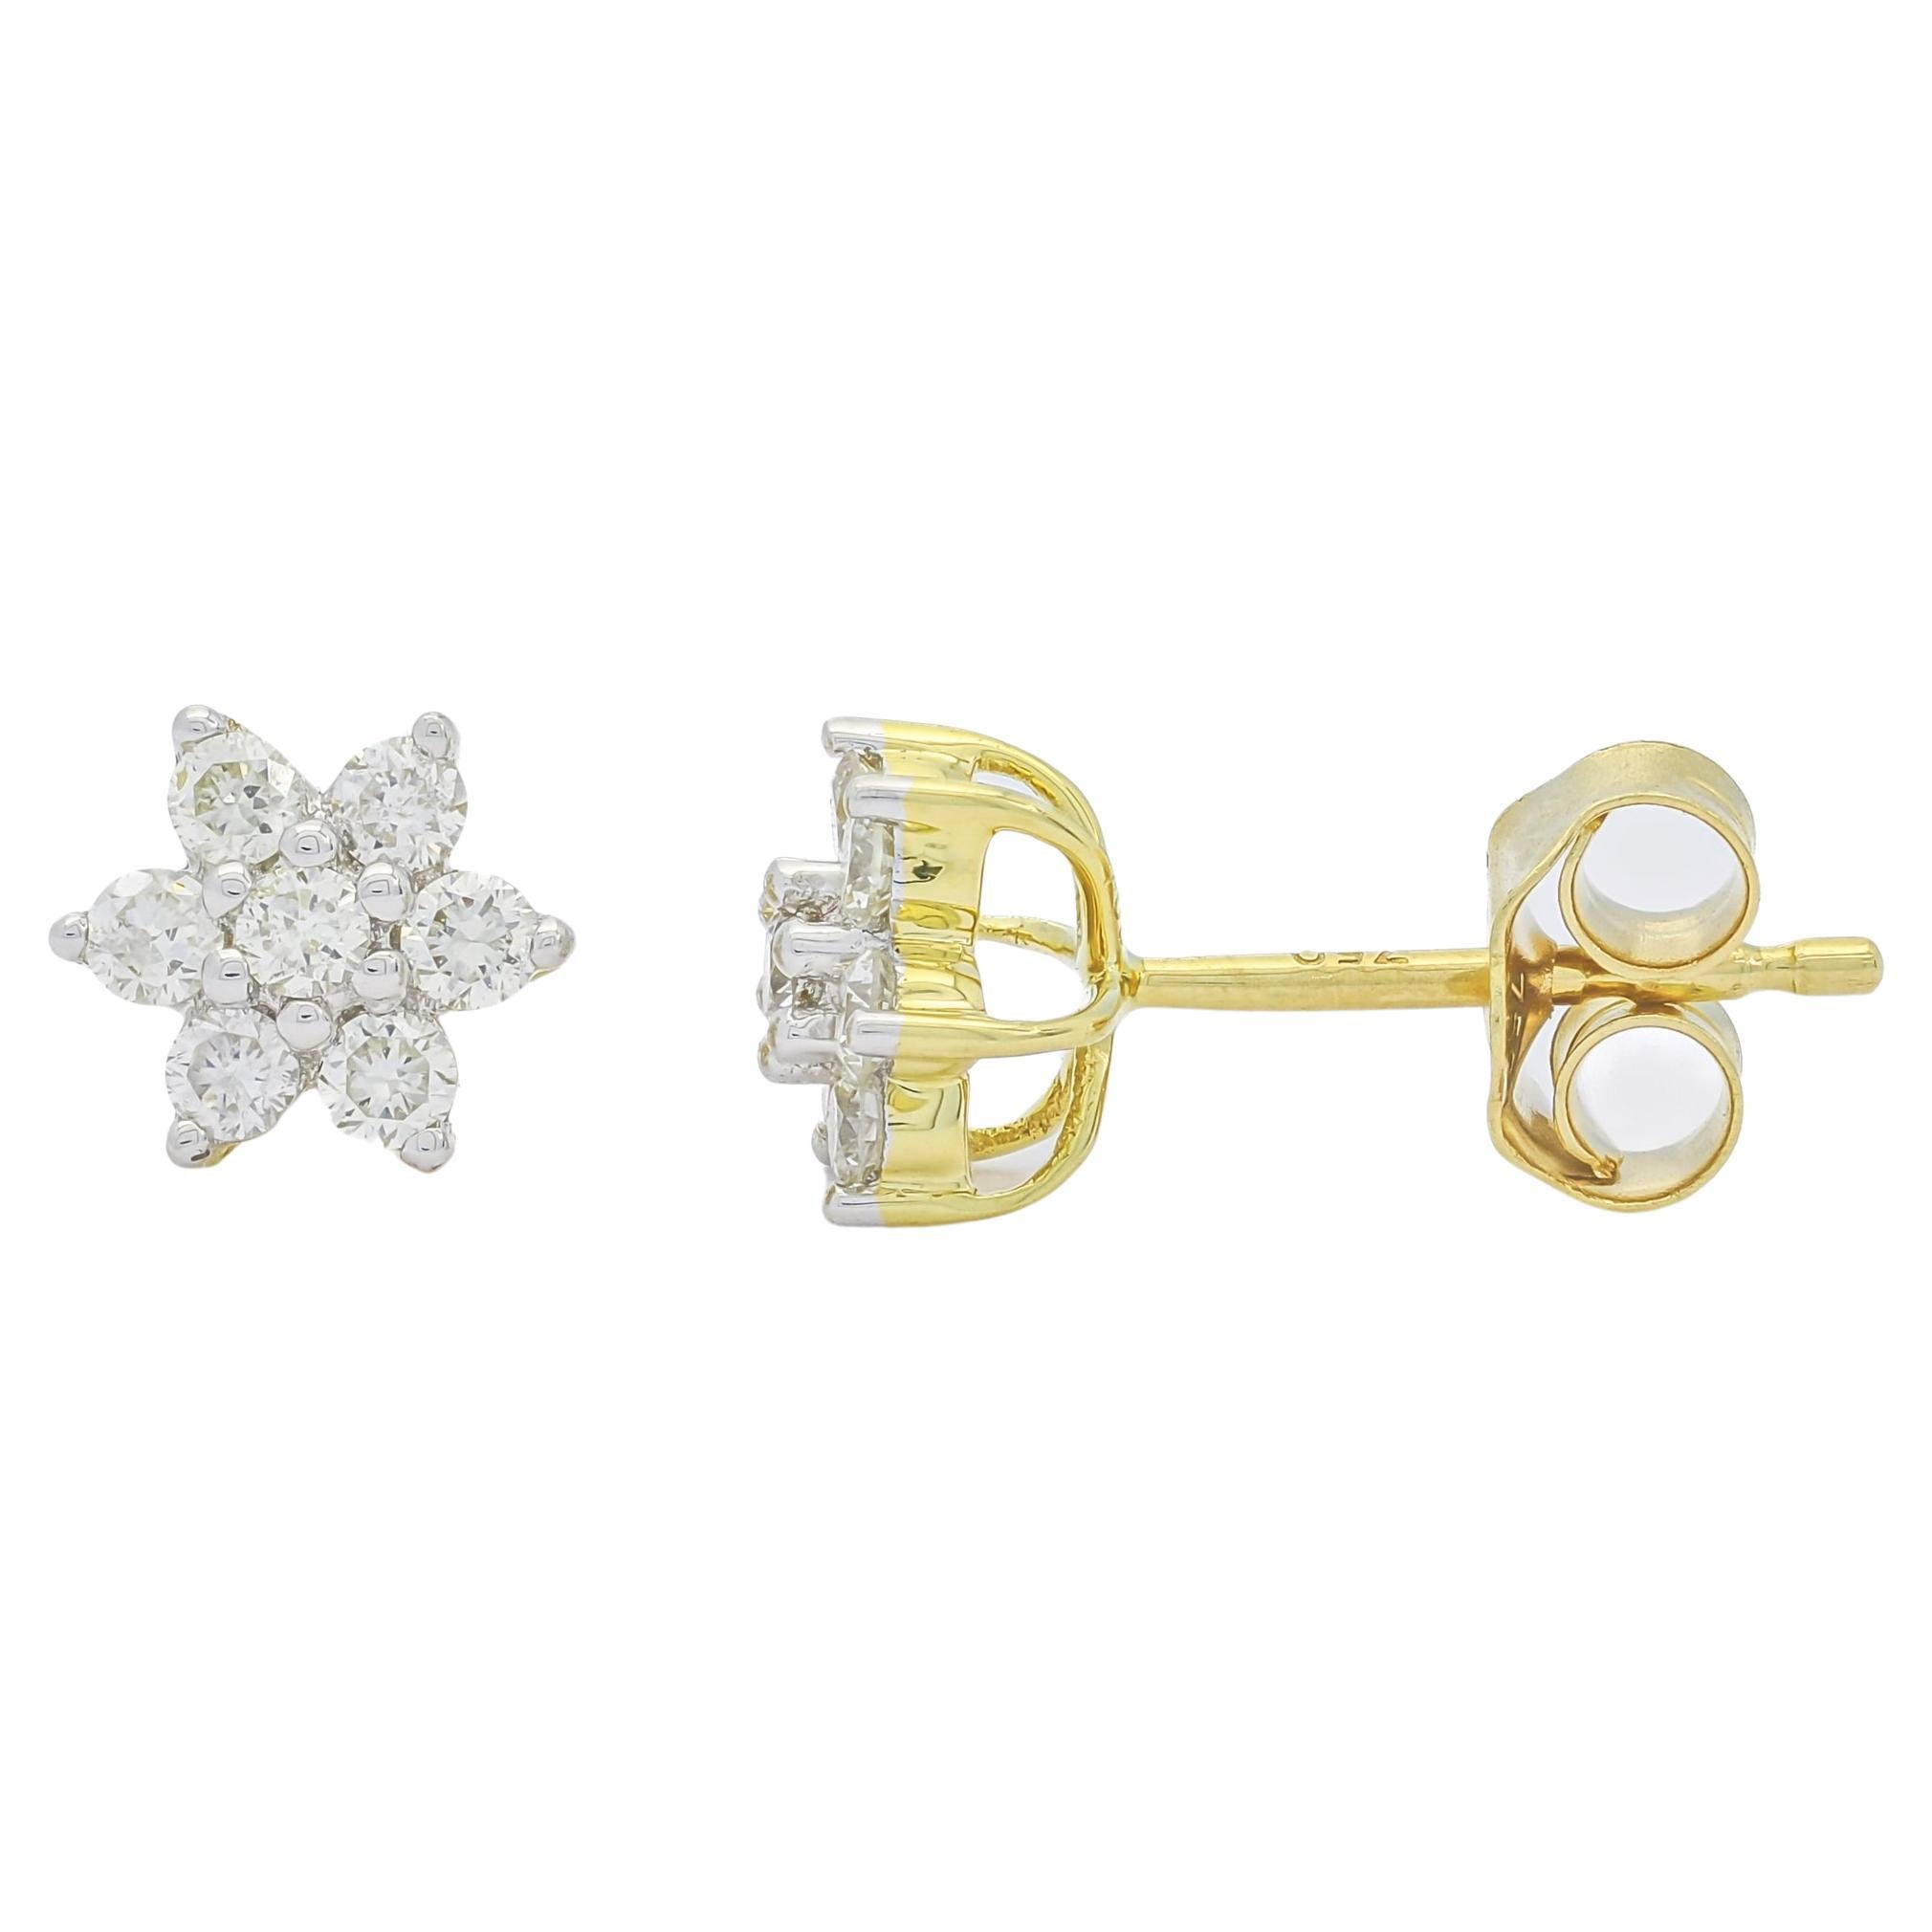 The combination of 18Kt yellow gold and a minimalist natural diamond flower shape cluster design creates a sophisticated and versatile accessory. 

The understated beauty of such earrings makes them suitable for various occasions, whether it's a